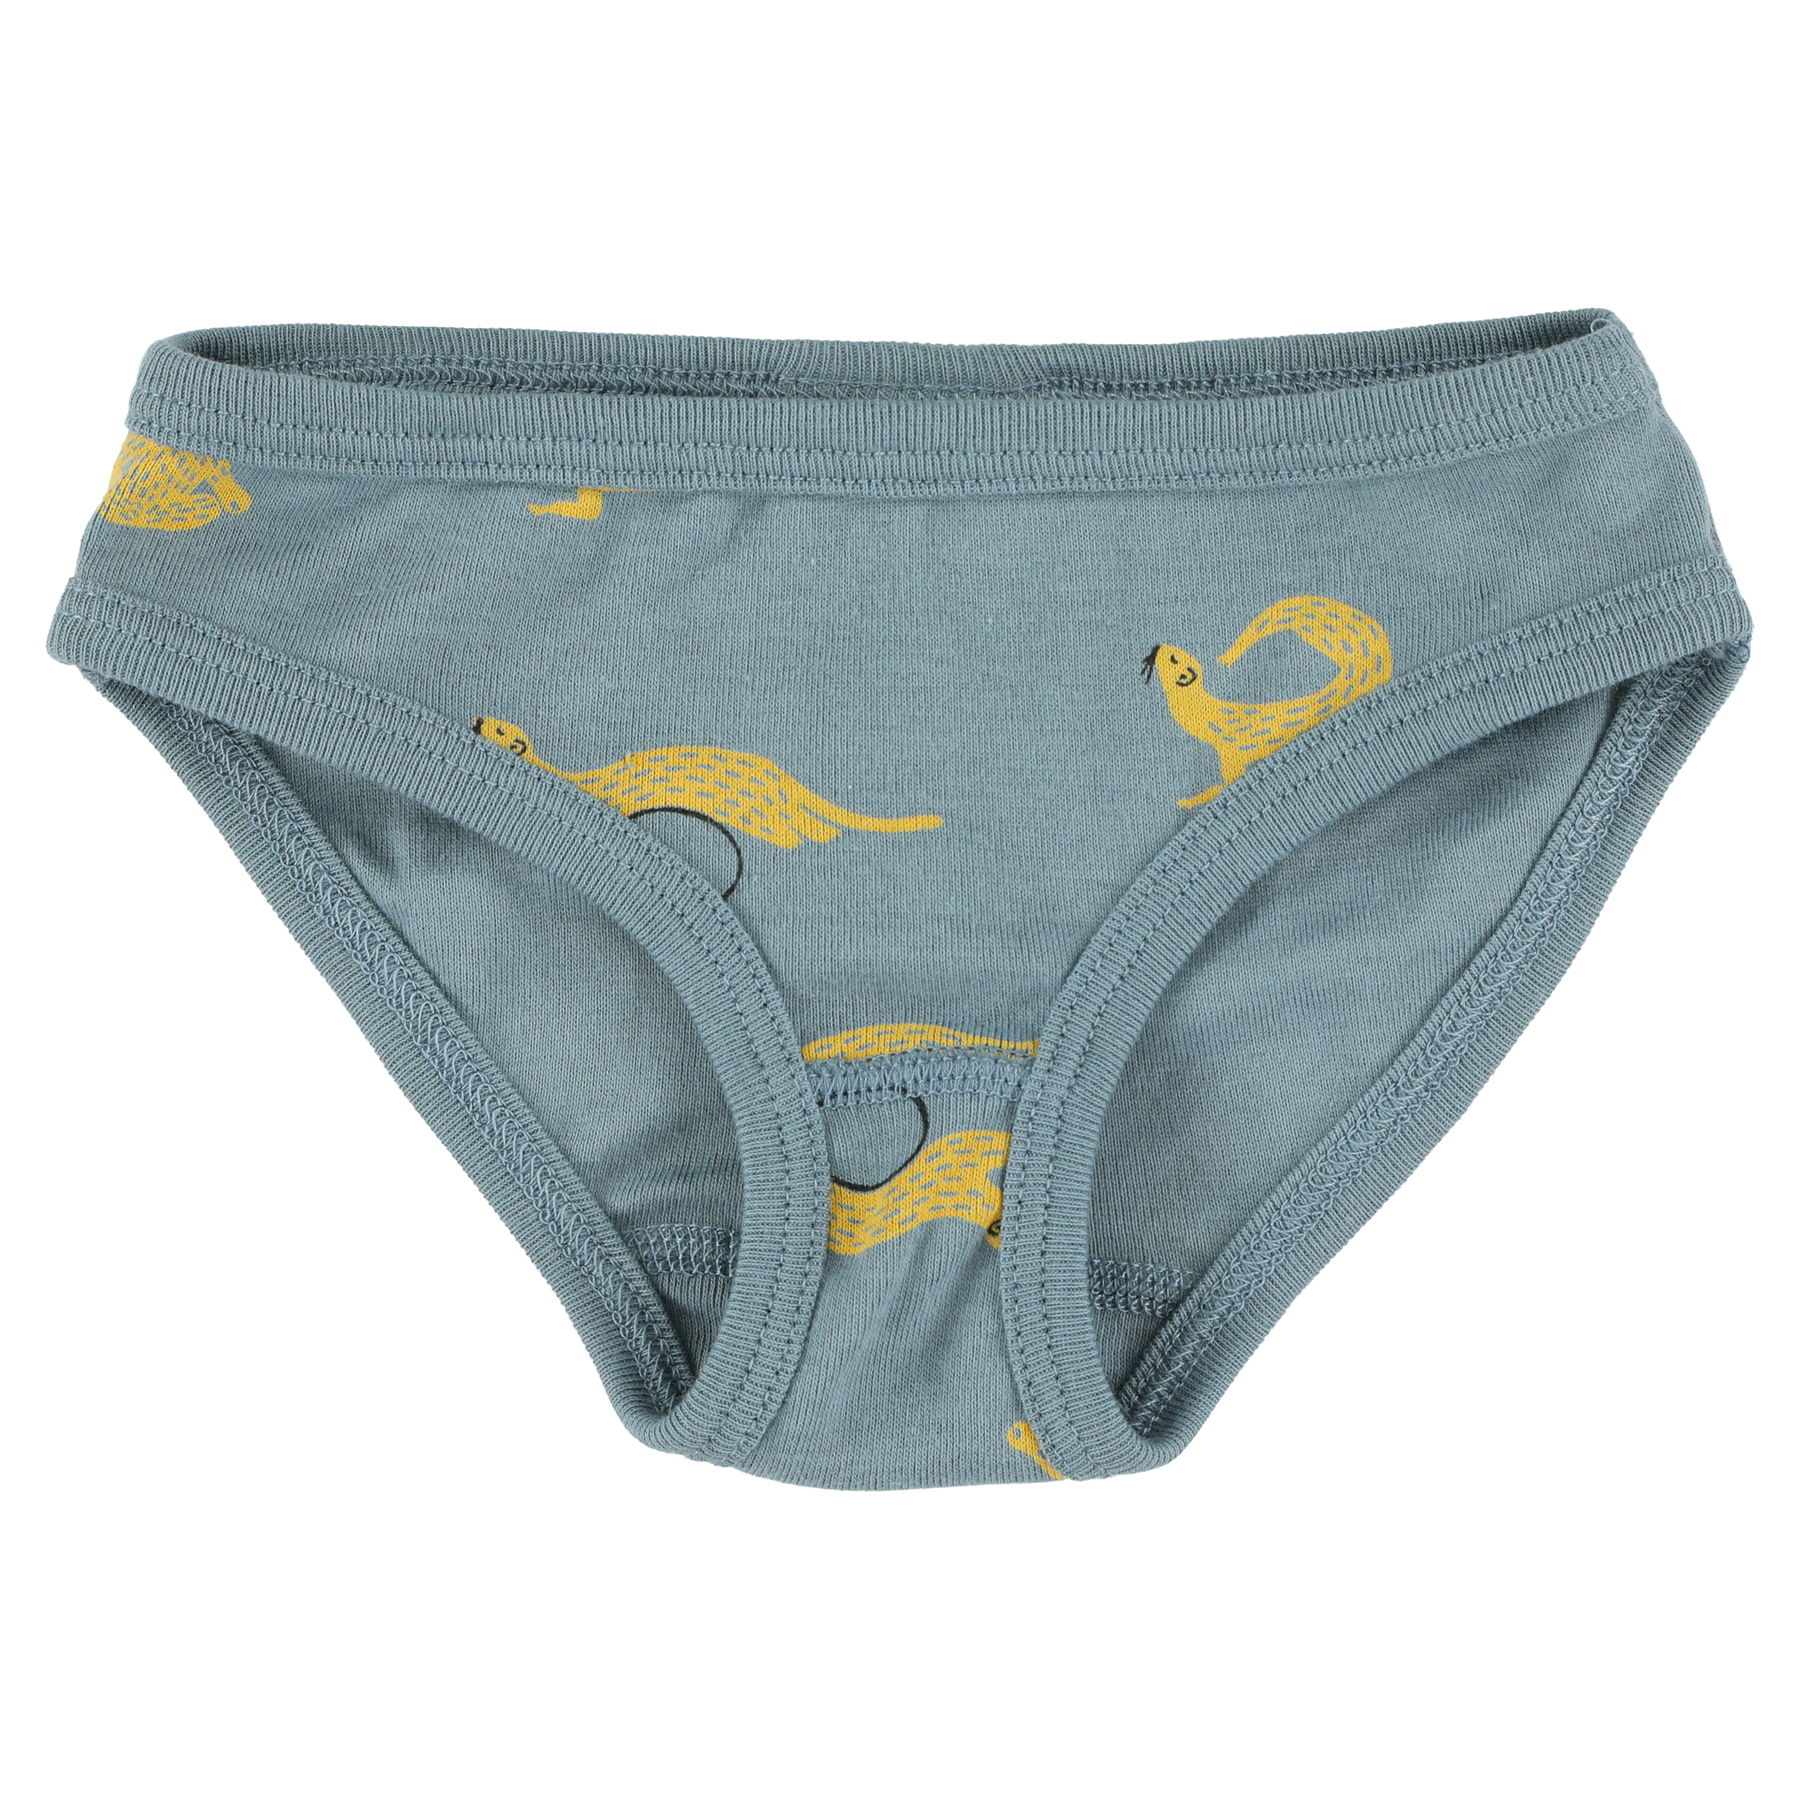 Culottes 2-pack - Whippy Weasel